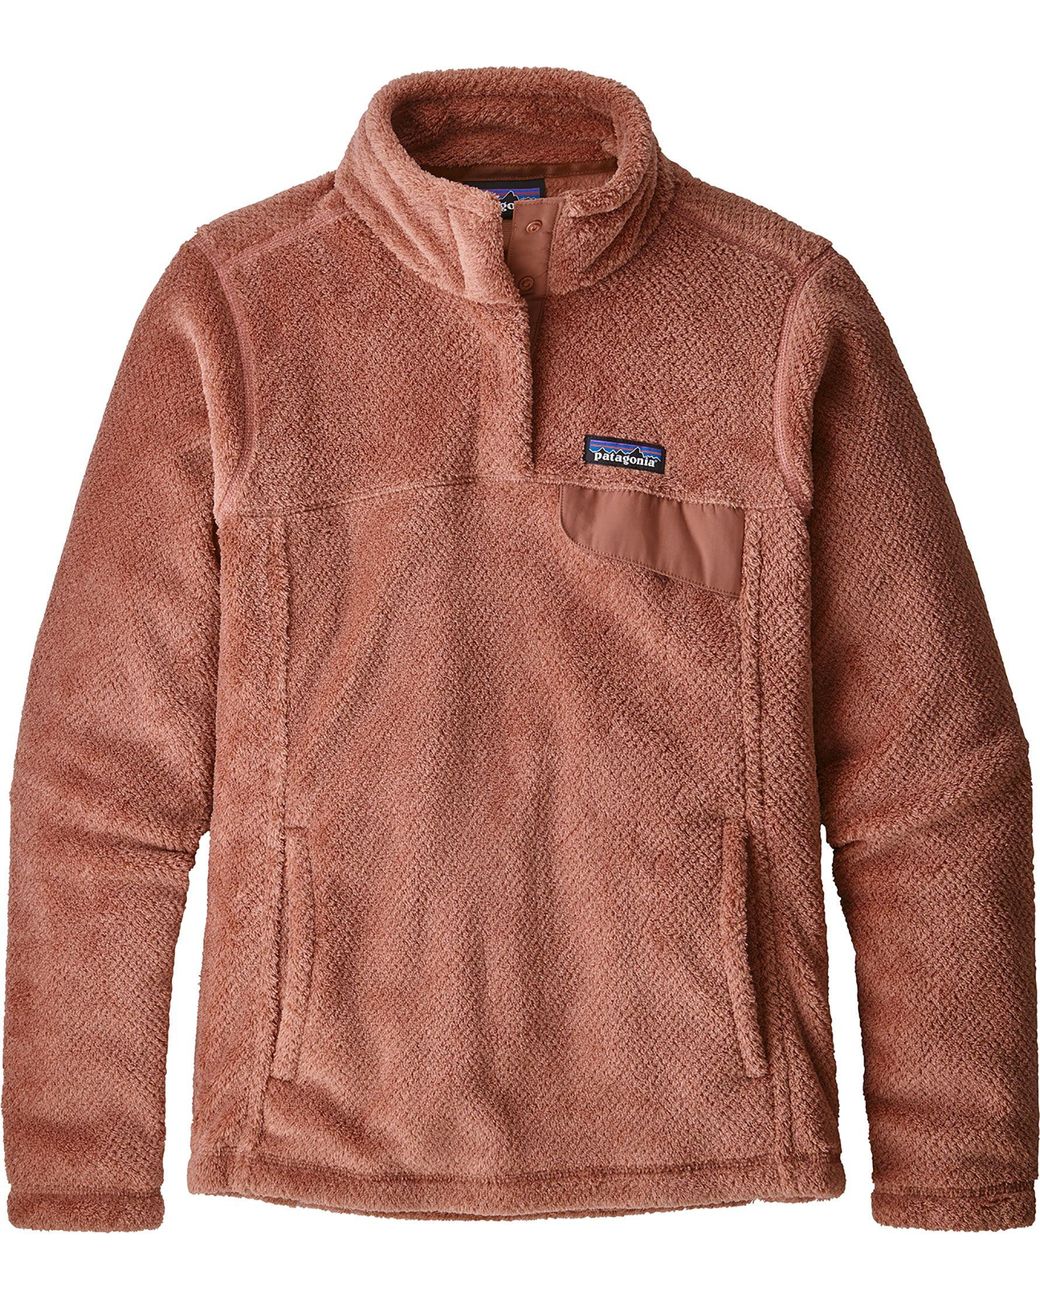 Patagonia Re-tool Snap-t Fleece Pullover in Pink - Lyst